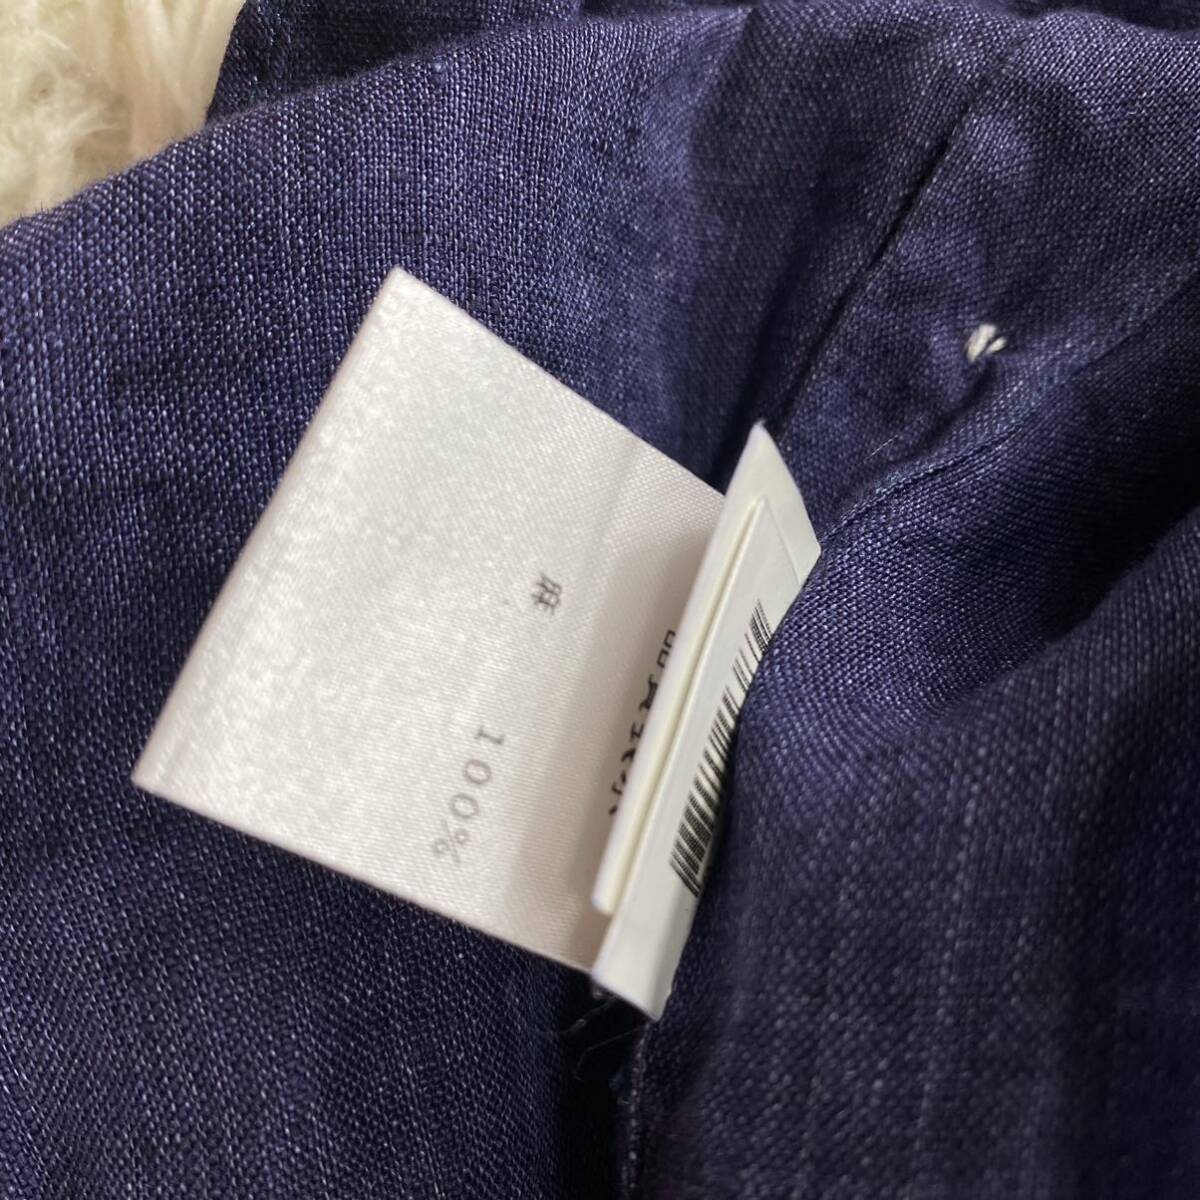  gentleman. .. finest quality. texture (fabric) [BARBA/ bar ba] short sleeves shirt S tops men's navy spring summer thing flax linen100% Italy made white button feeling of luxury 